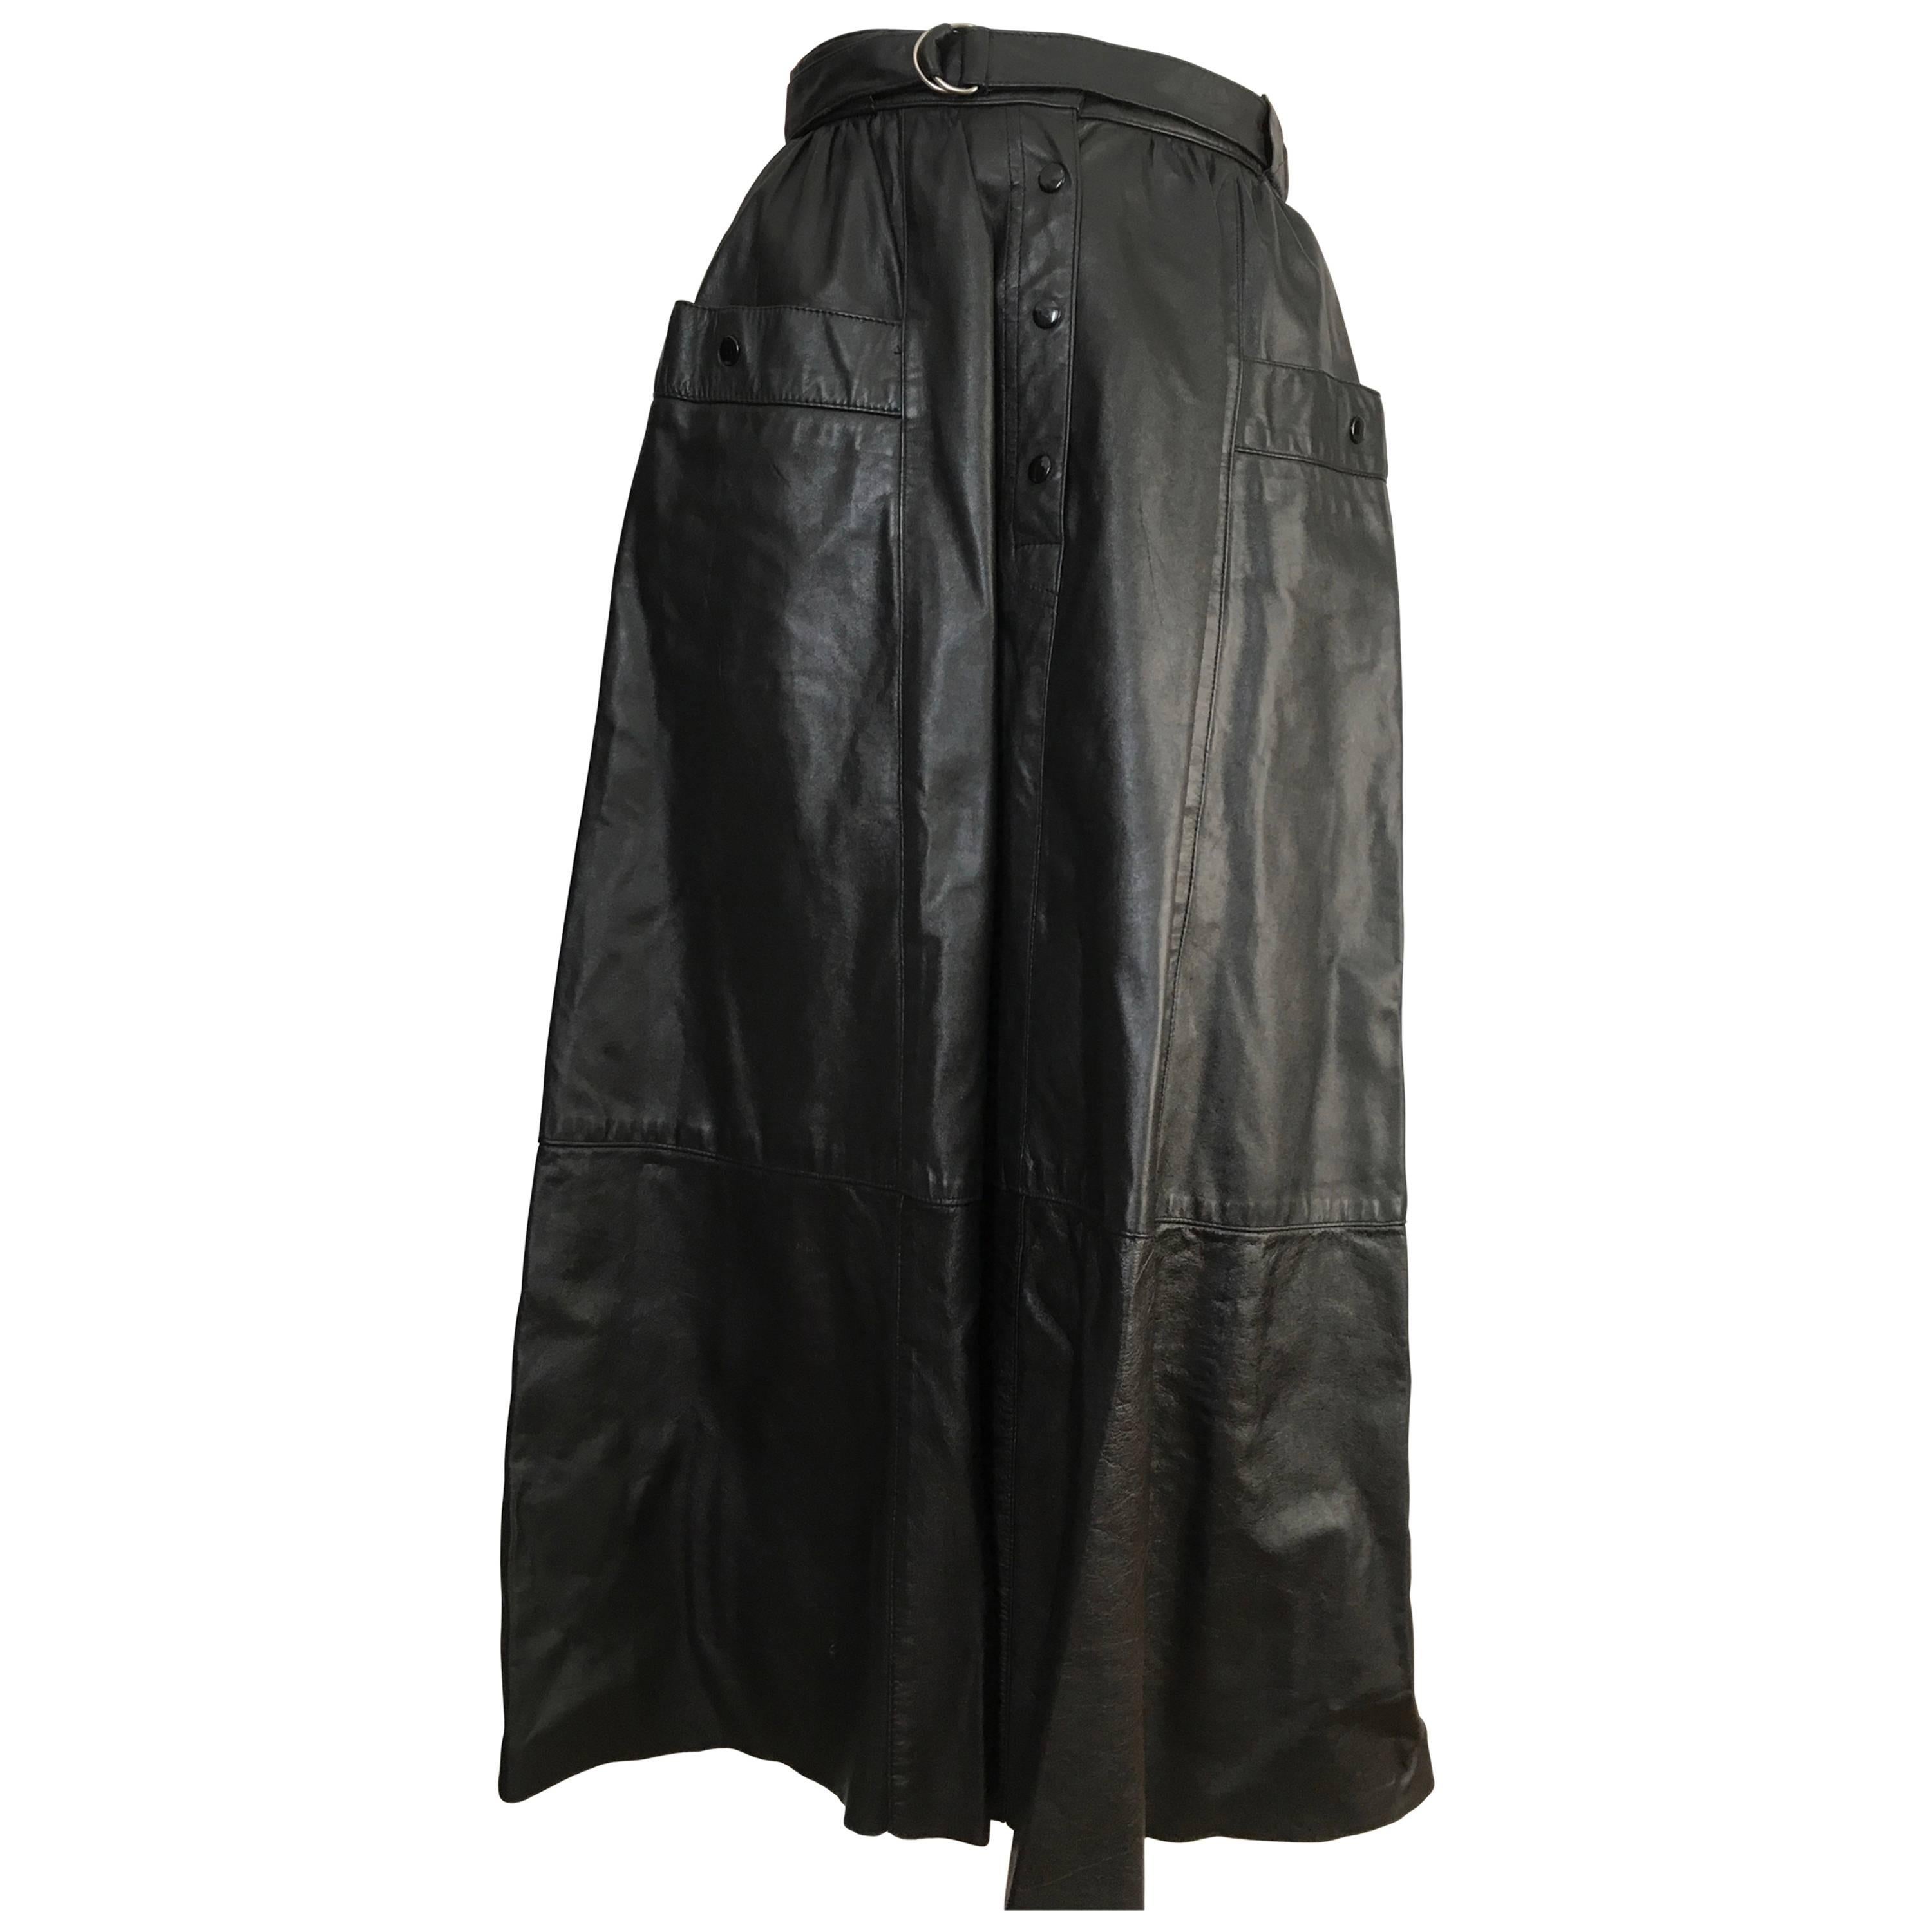 Saks Fifth Avenue 1980s Black Leather A Line Skirt with Pockets Size 4.  For Sale